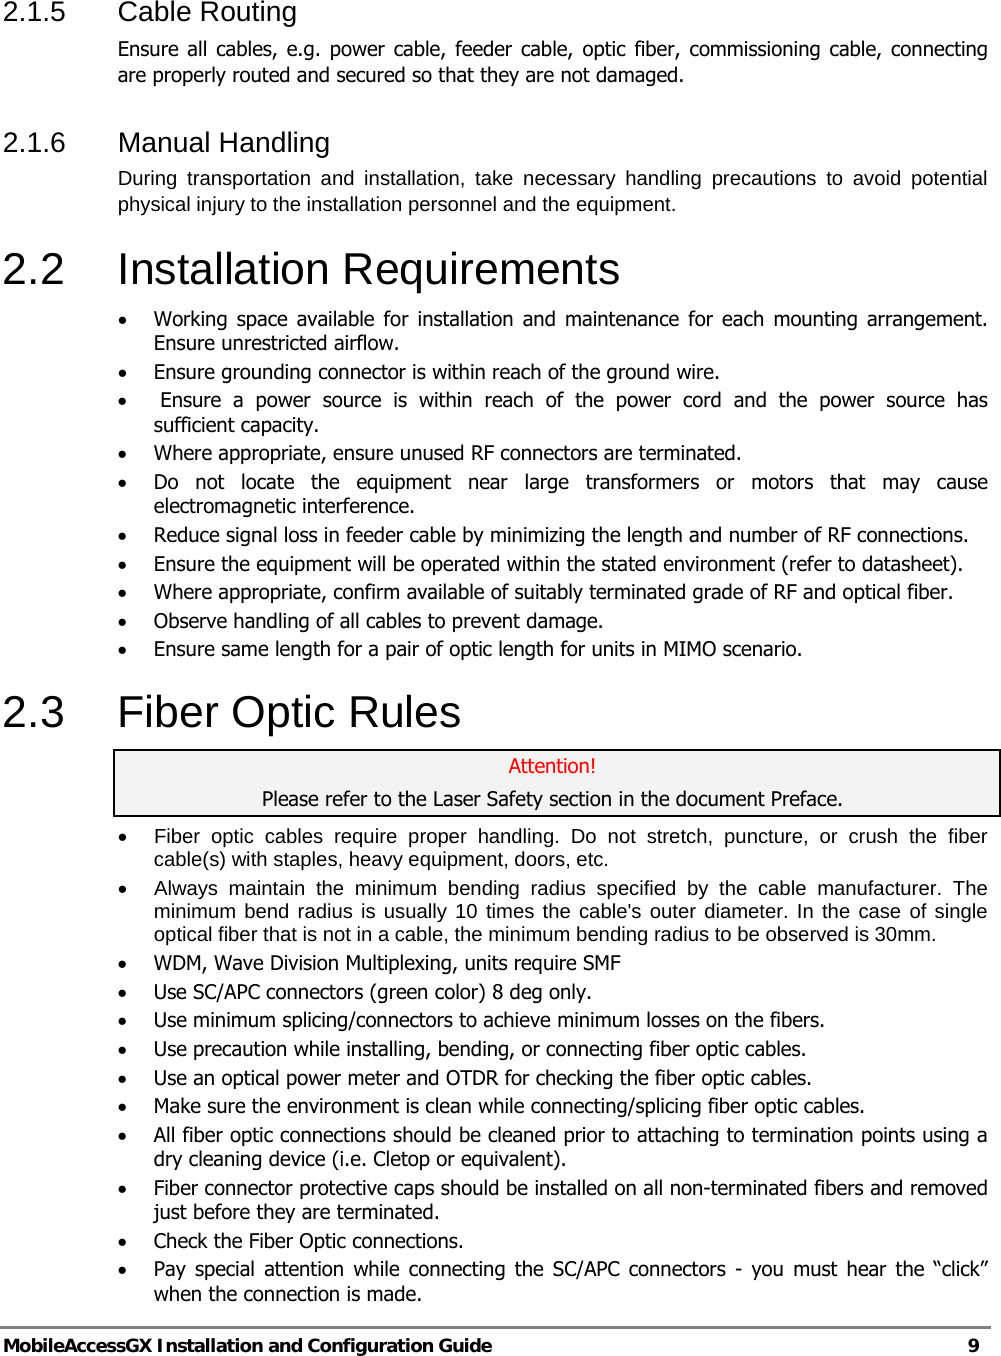   MobileAccessGX Installation and Configuration Guide   9  2.1.5 Cable Routing  Ensure all cables, e.g. power cable, feeder cable, optic fiber, commissioning cable, connecting are properly routed and secured so that they are not damaged.  2.1.6  Manual Handling  During transportation and installation, take necessary handling precautions to avoid potential physical injury to the installation personnel and the equipment.  2.2 Installation Requirements • Working space available for installation and maintenance for each mounting arrangement. Ensure unrestricted airflow.  • Ensure grounding connector is within reach of the ground wire.  •  Ensure a power source is within reach of the power cord and the power source has sufficient capacity.  • Where appropriate, ensure unused RF connectors are terminated.  • Do not locate the equipment near large transformers or motors that may cause electromagnetic interference.  • Reduce signal loss in feeder cable by minimizing the length and number of RF connections.  • Ensure the equipment will be operated within the stated environment (refer to datasheet).  • Where appropriate, confirm available of suitably terminated grade of RF and optical fiber.  • Observe handling of all cables to prevent damage.  • Ensure same length for a pair of optic length for units in MIMO scenario. 2.3  Fiber Optic Rules Attention! Please refer to the Laser Safety section in the document Preface. •  Fiber optic cables require proper handling. Do not stretch, puncture, or crush the fiber cable(s) with staples, heavy equipment, doors, etc. •  Always maintain the minimum bending radius specified by the cable manufacturer. The minimum bend radius is usually 10 times the cable&apos;s outer diameter. In the case of single optical fiber that is not in a cable, the minimum bending radius to be observed is 30mm. • WDM, Wave Division Multiplexing, units require SMF • Use SC/APC connectors (green color) 8 deg only. • Use minimum splicing/connectors to achieve minimum losses on the fibers. • Use precaution while installing, bending, or connecting fiber optic cables. • Use an optical power meter and OTDR for checking the fiber optic cables. • Make sure the environment is clean while connecting/splicing fiber optic cables.  • All fiber optic connections should be cleaned prior to attaching to termination points using a dry cleaning device (i.e. Cletop or equivalent). • Fiber connector protective caps should be installed on all non-terminated fibers and removed just before they are terminated. • Check the Fiber Optic connections.  • Pay special attention while connecting the SC/APC connectors - you must hear the “click” when the connection is made. 